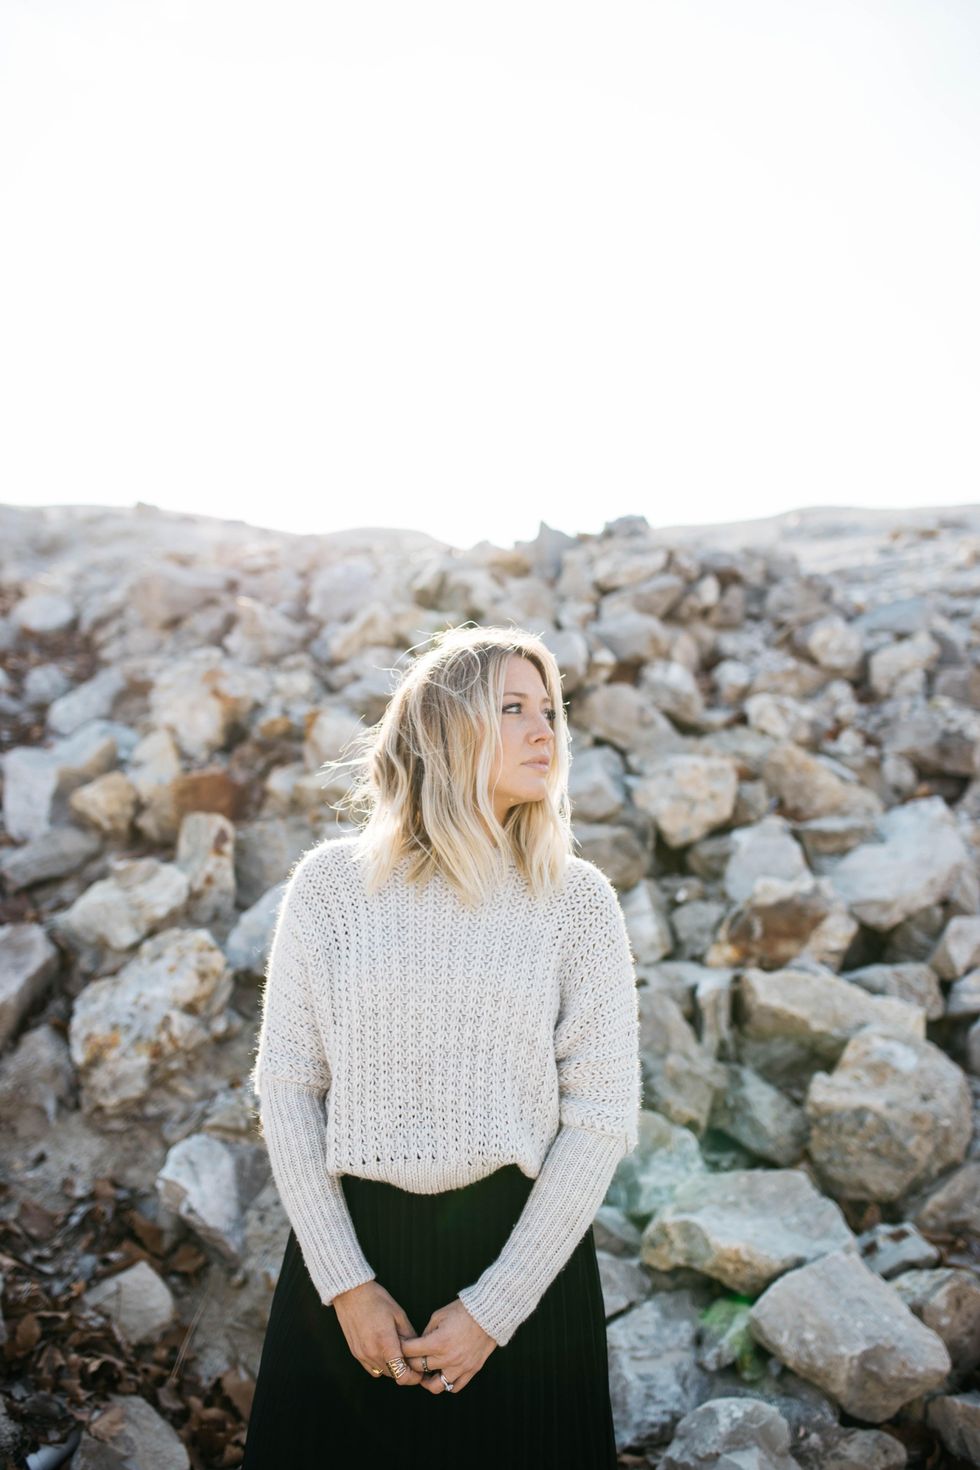 5 Simple Ways To Give Yourself Grace, Especially When Life Gets Hard